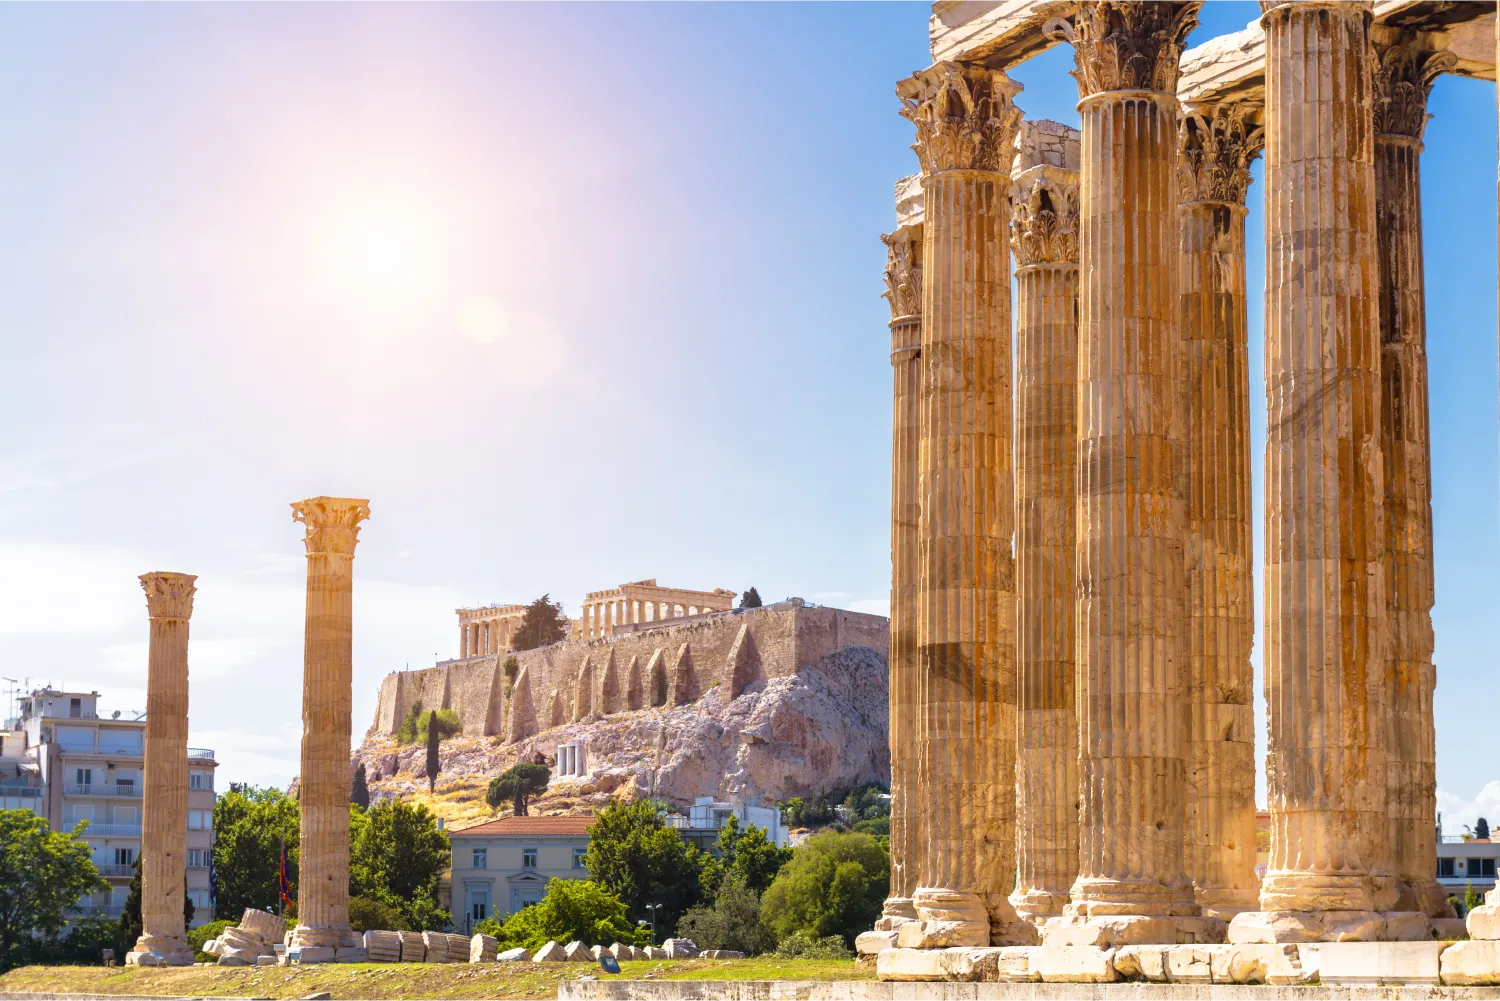 Athens Athens View Zeus Temple Overlooking Acropolis Greece Ancient Greek Ruins Famous Landmarks Of Athens City Scenery Of Great Columns Of Classical Building In Athens Center Travel In Greece Theme image